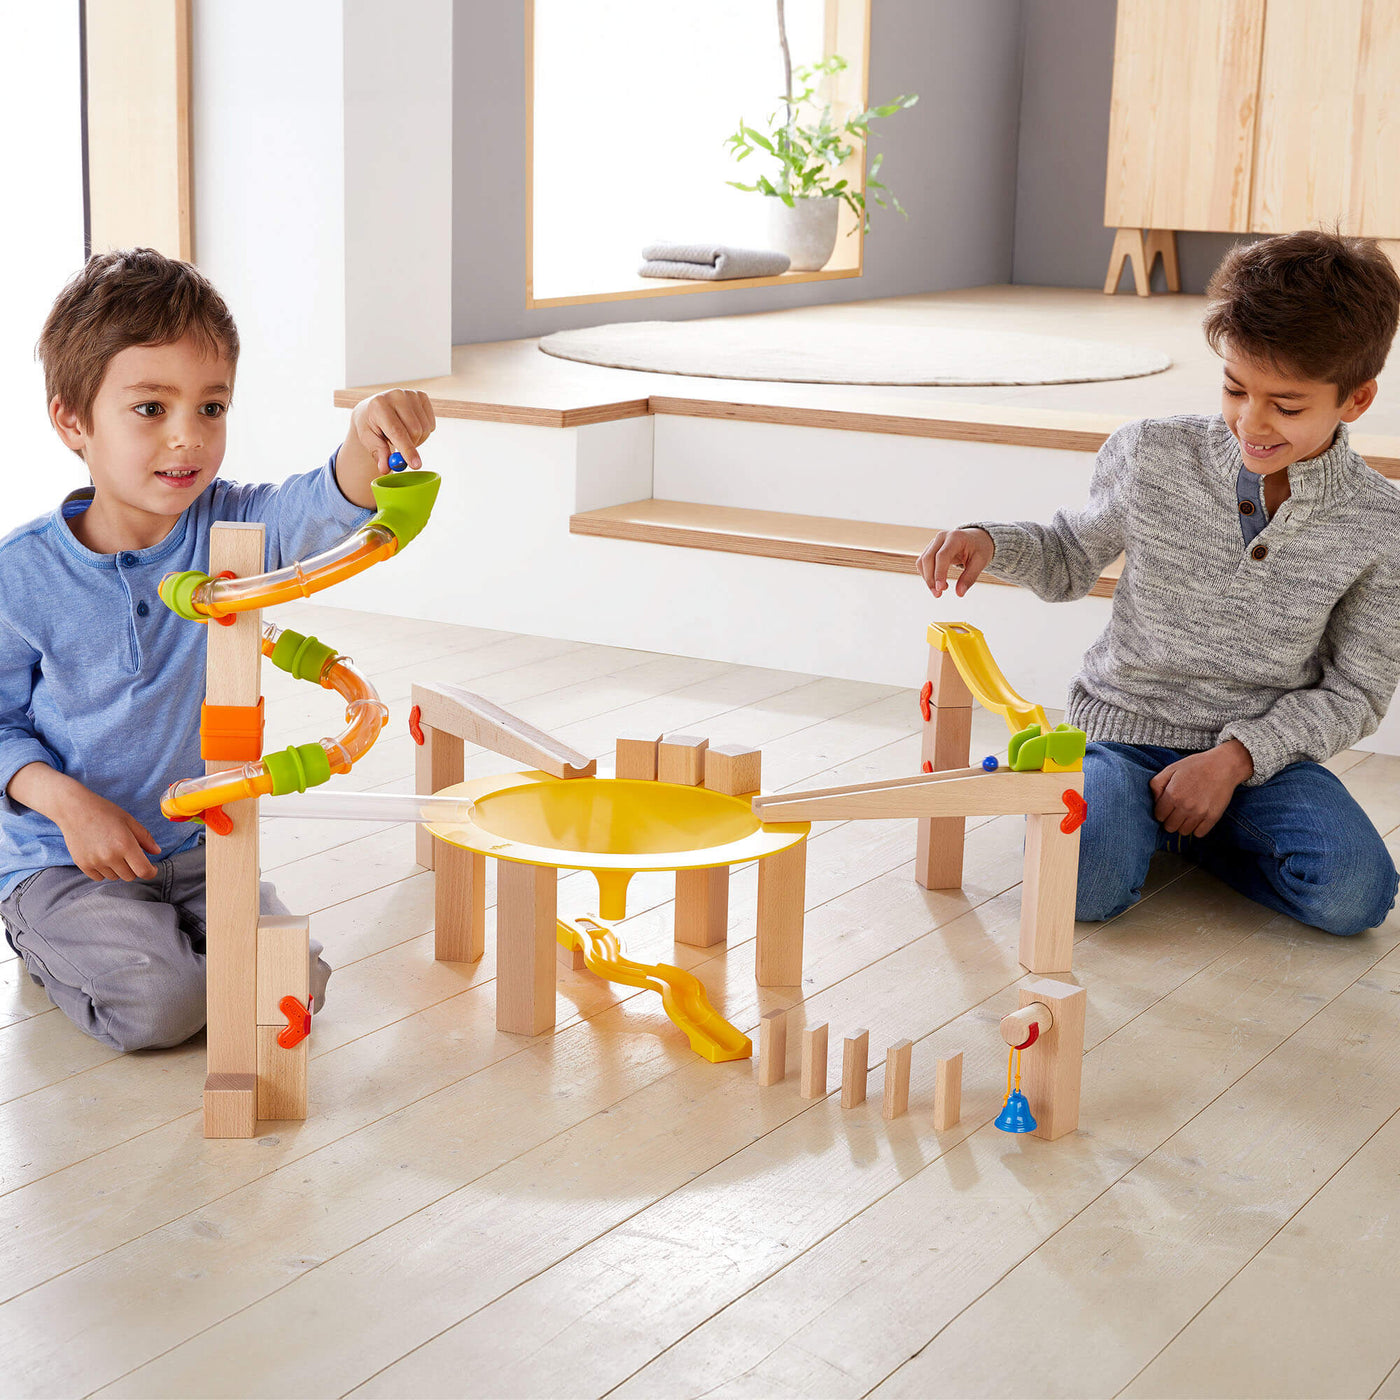 Two young boys planning with Marble Run Funnel Jungle Starter Set on wooden floor in living room